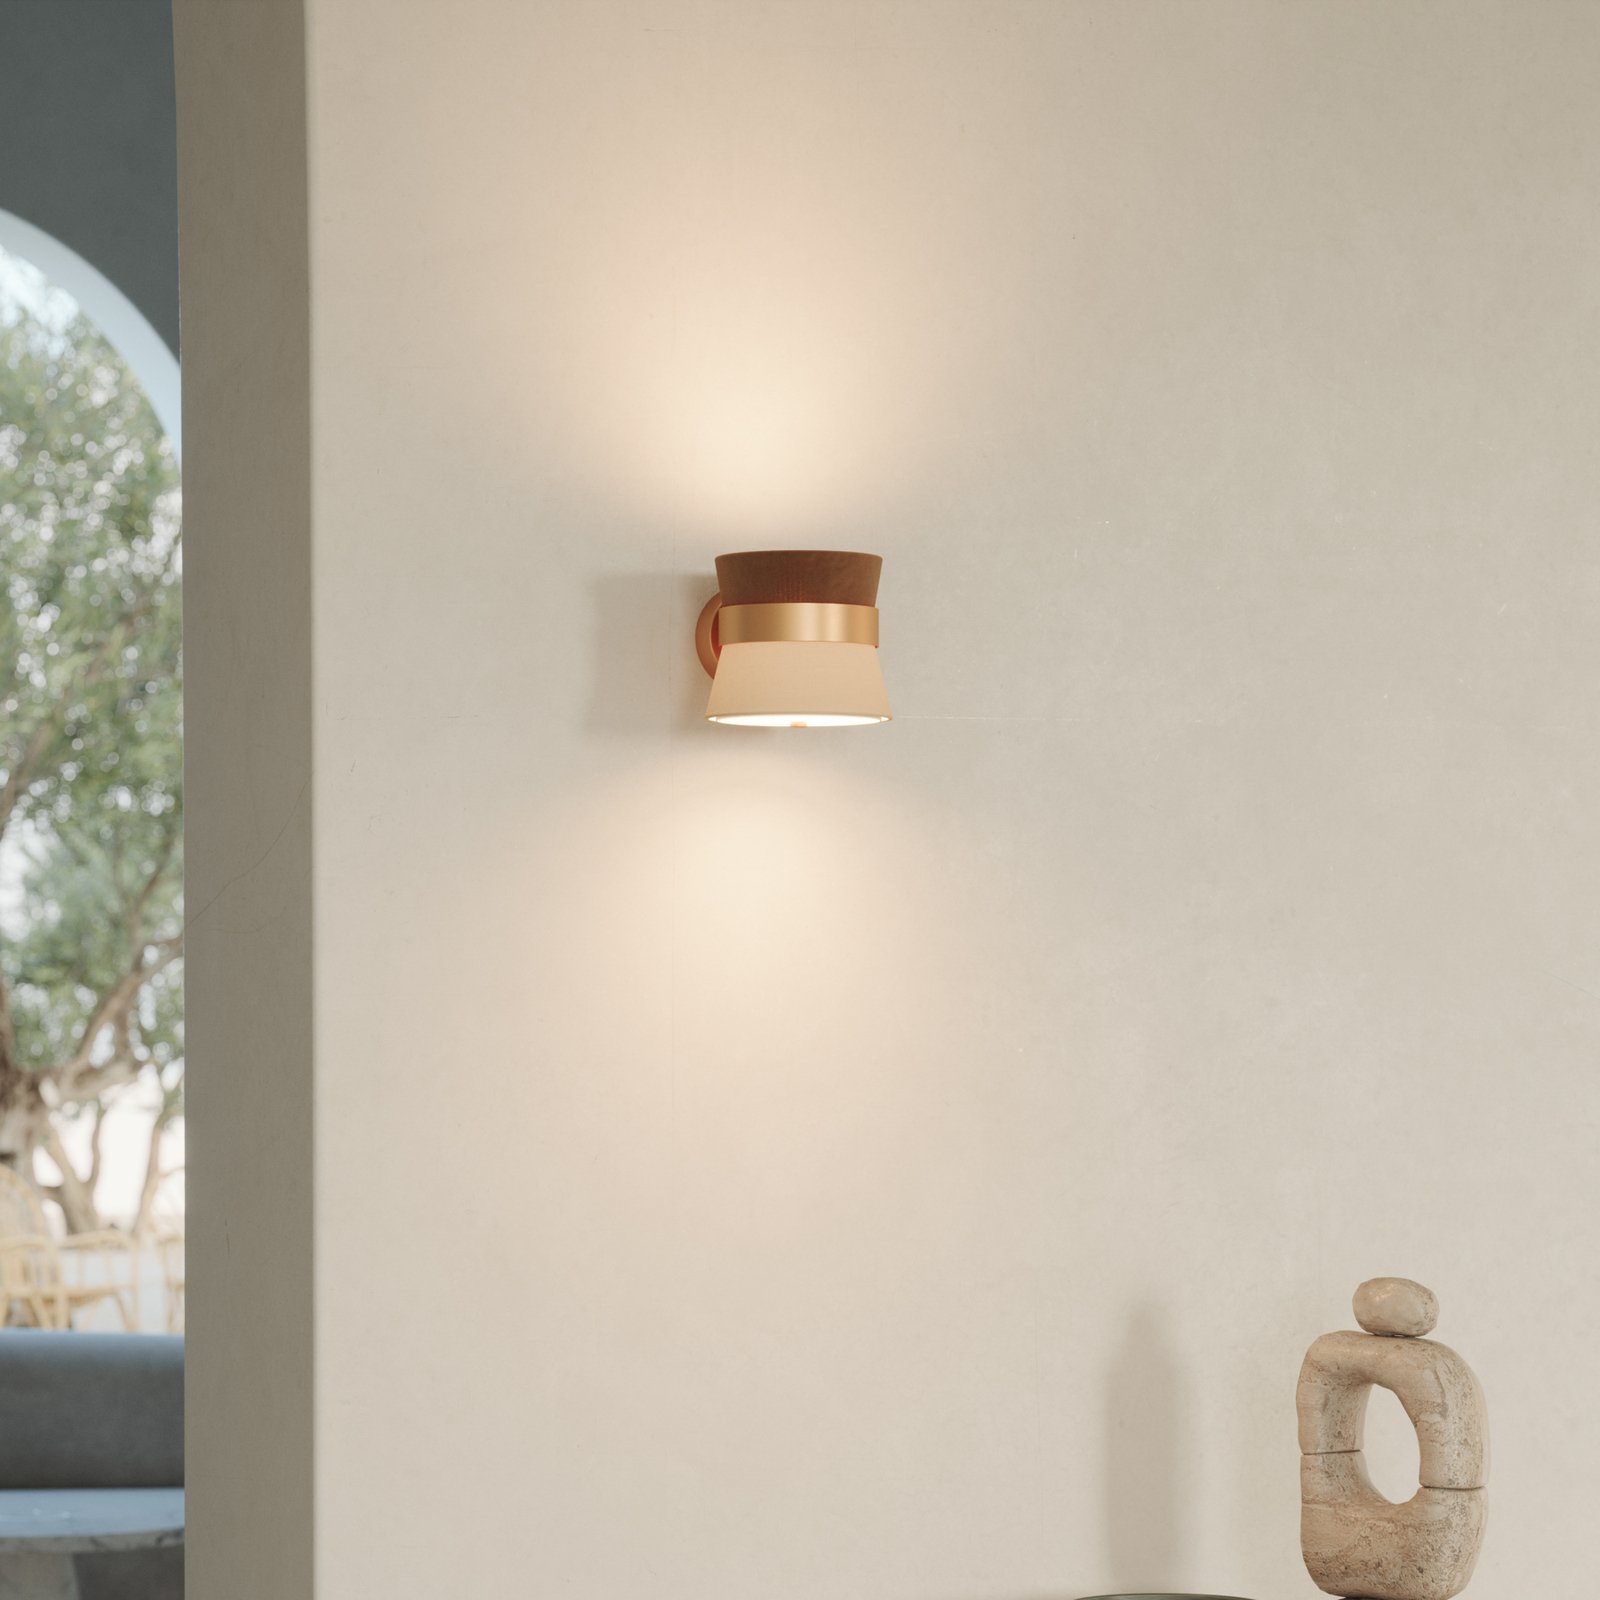 Easy Light Caramelo wall light, coffee brown